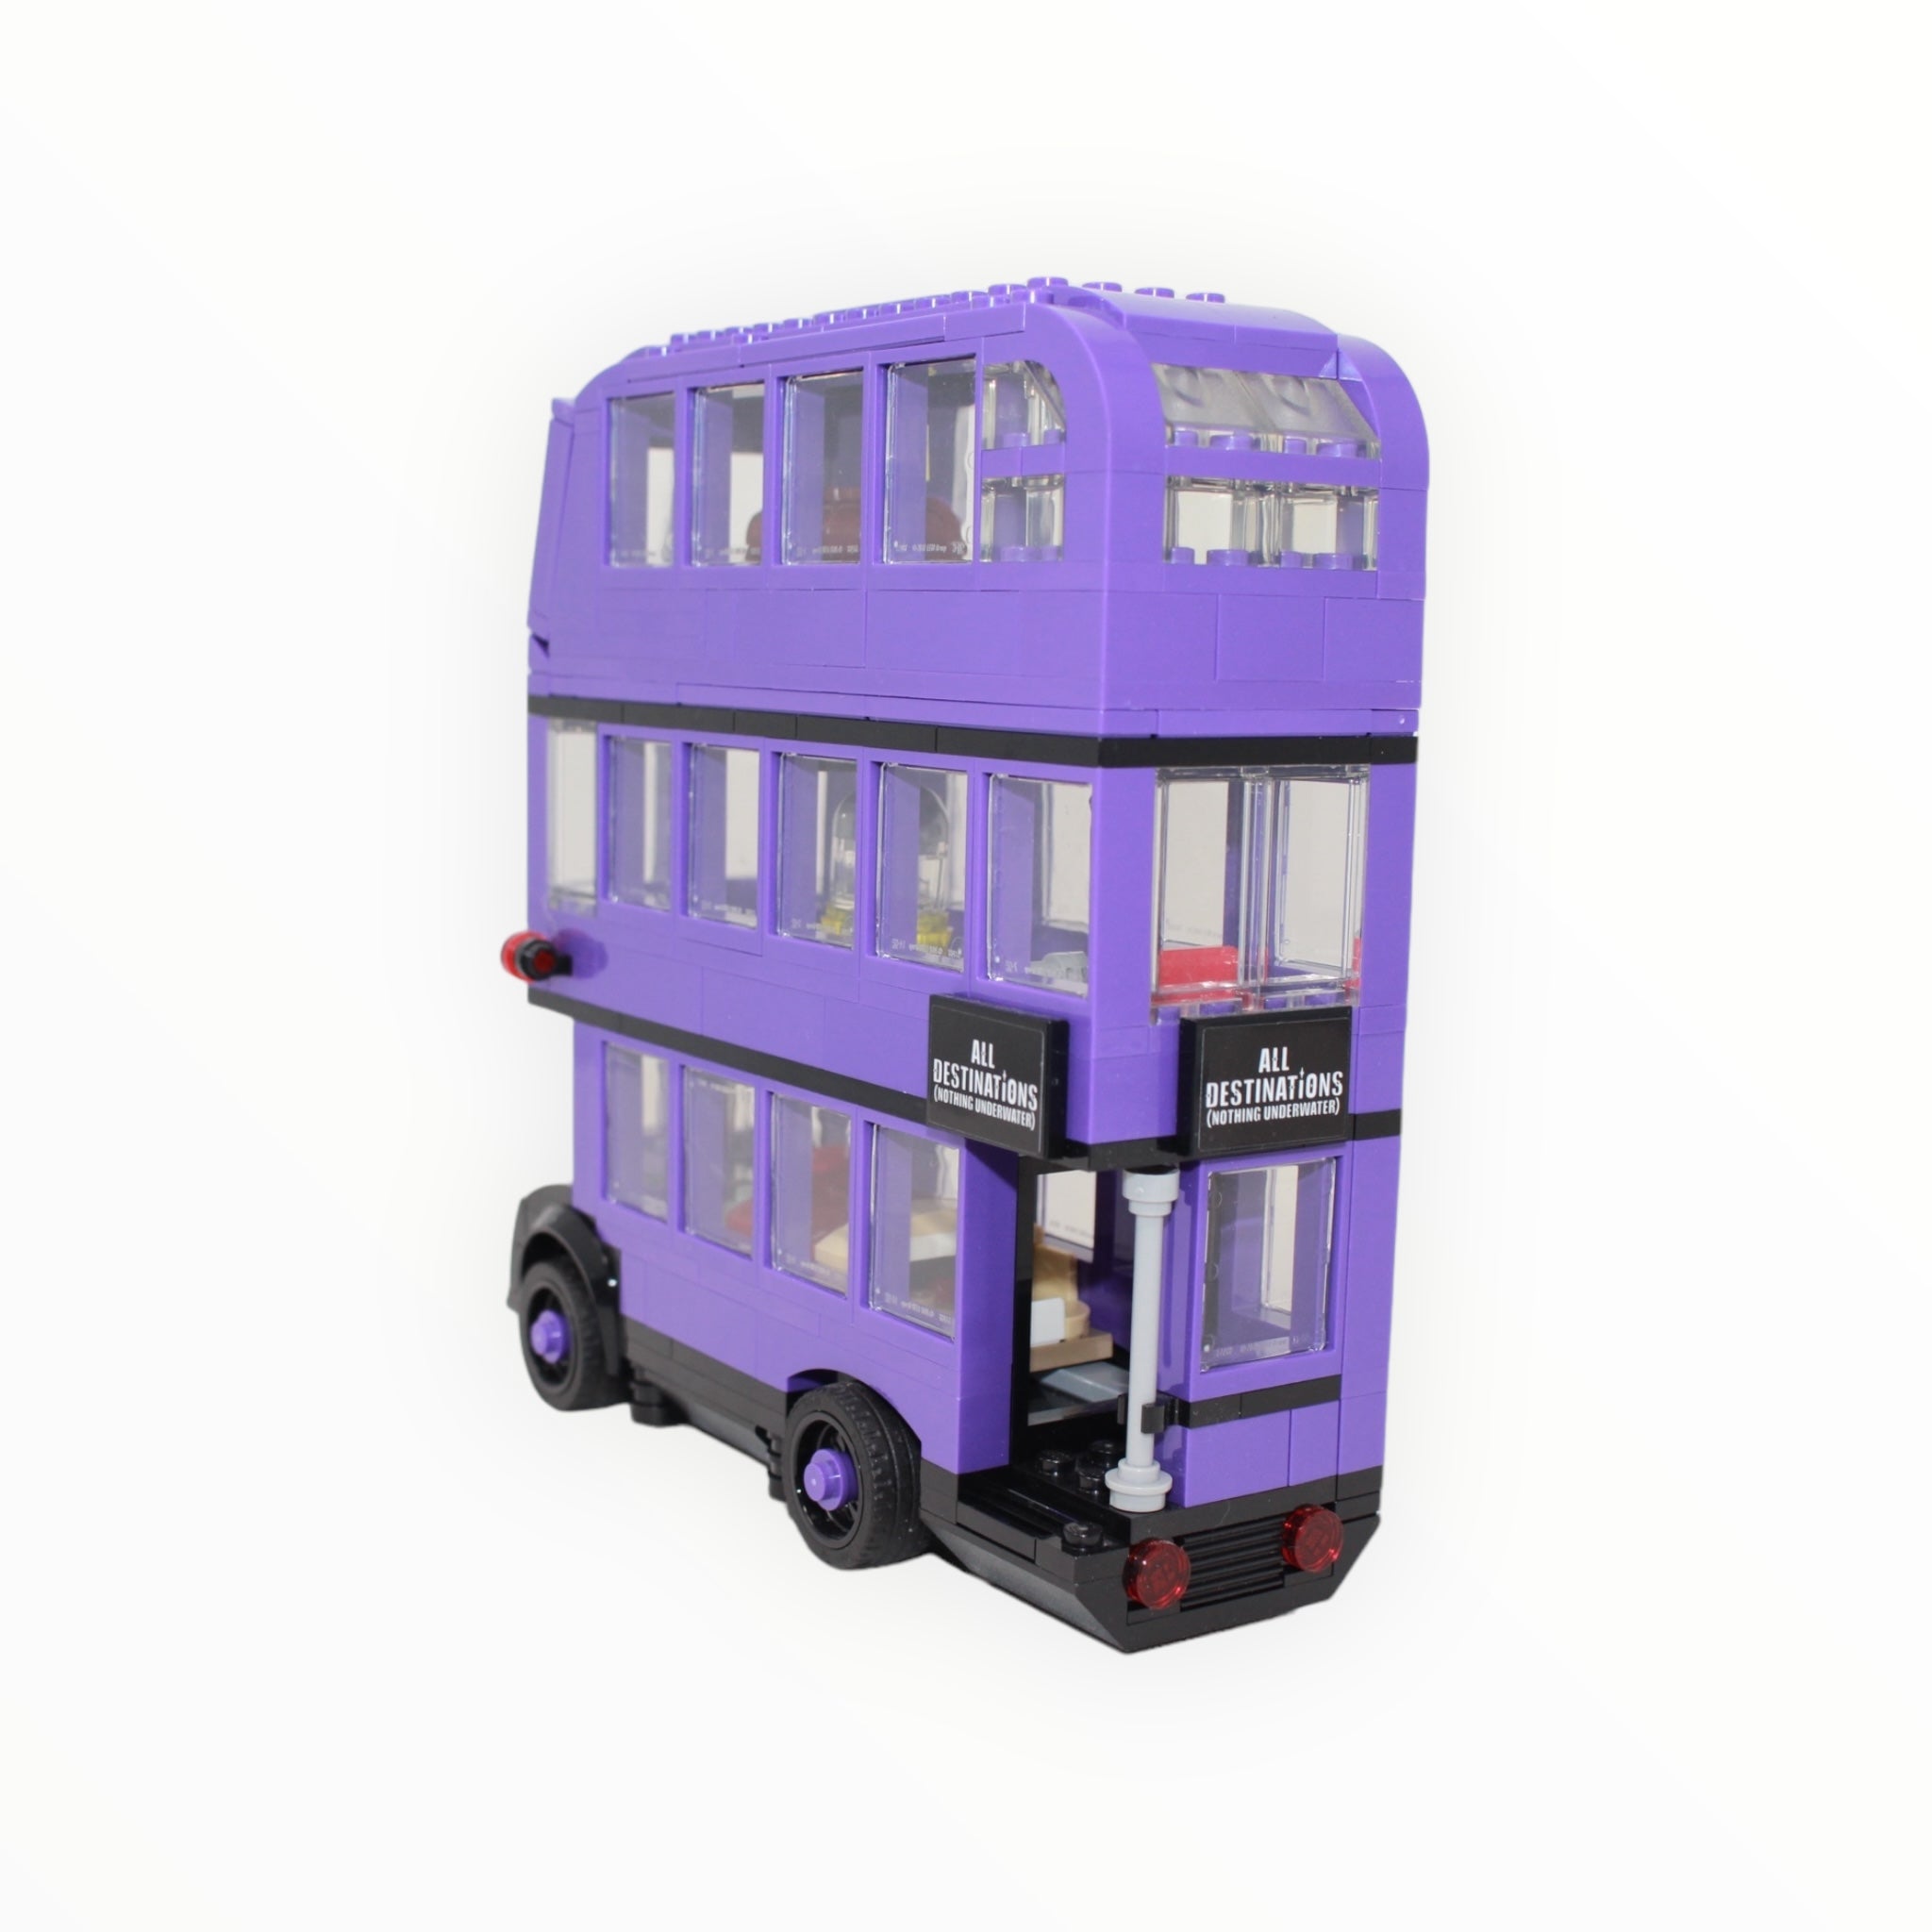 Used Set 75957 Harry Potter The Knight Bus (2019)